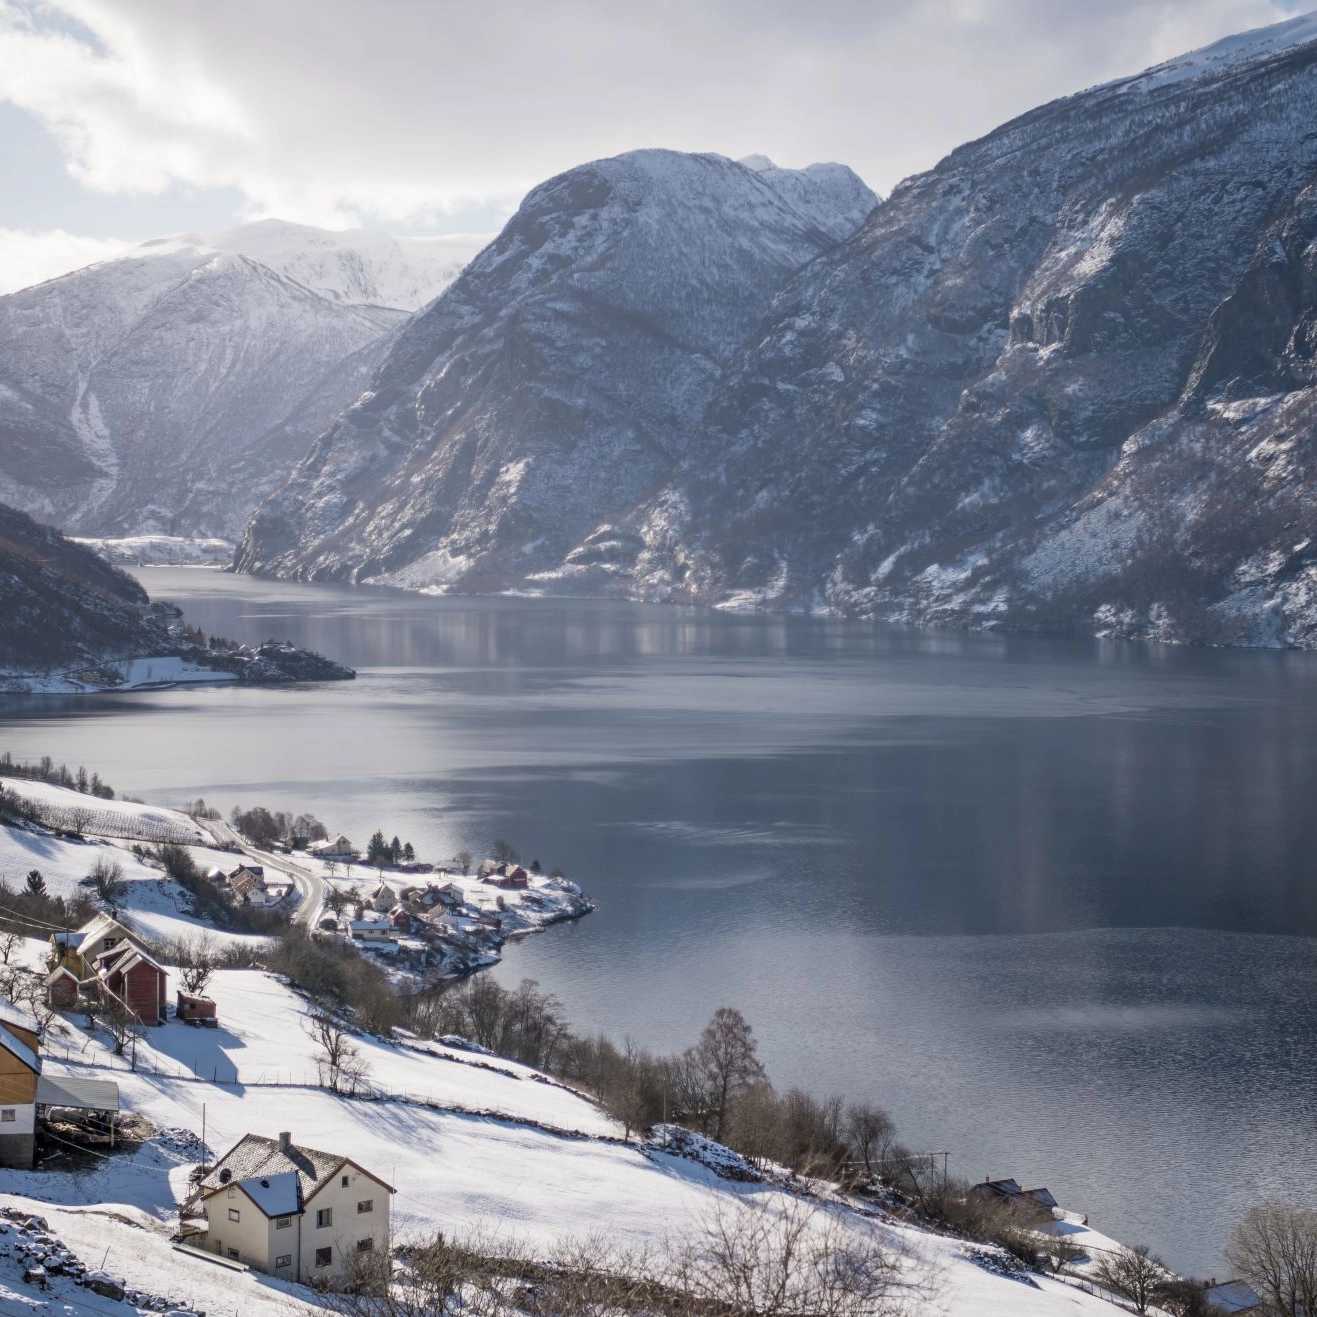 A winter day in Flåm - the Sognefjord, Norway